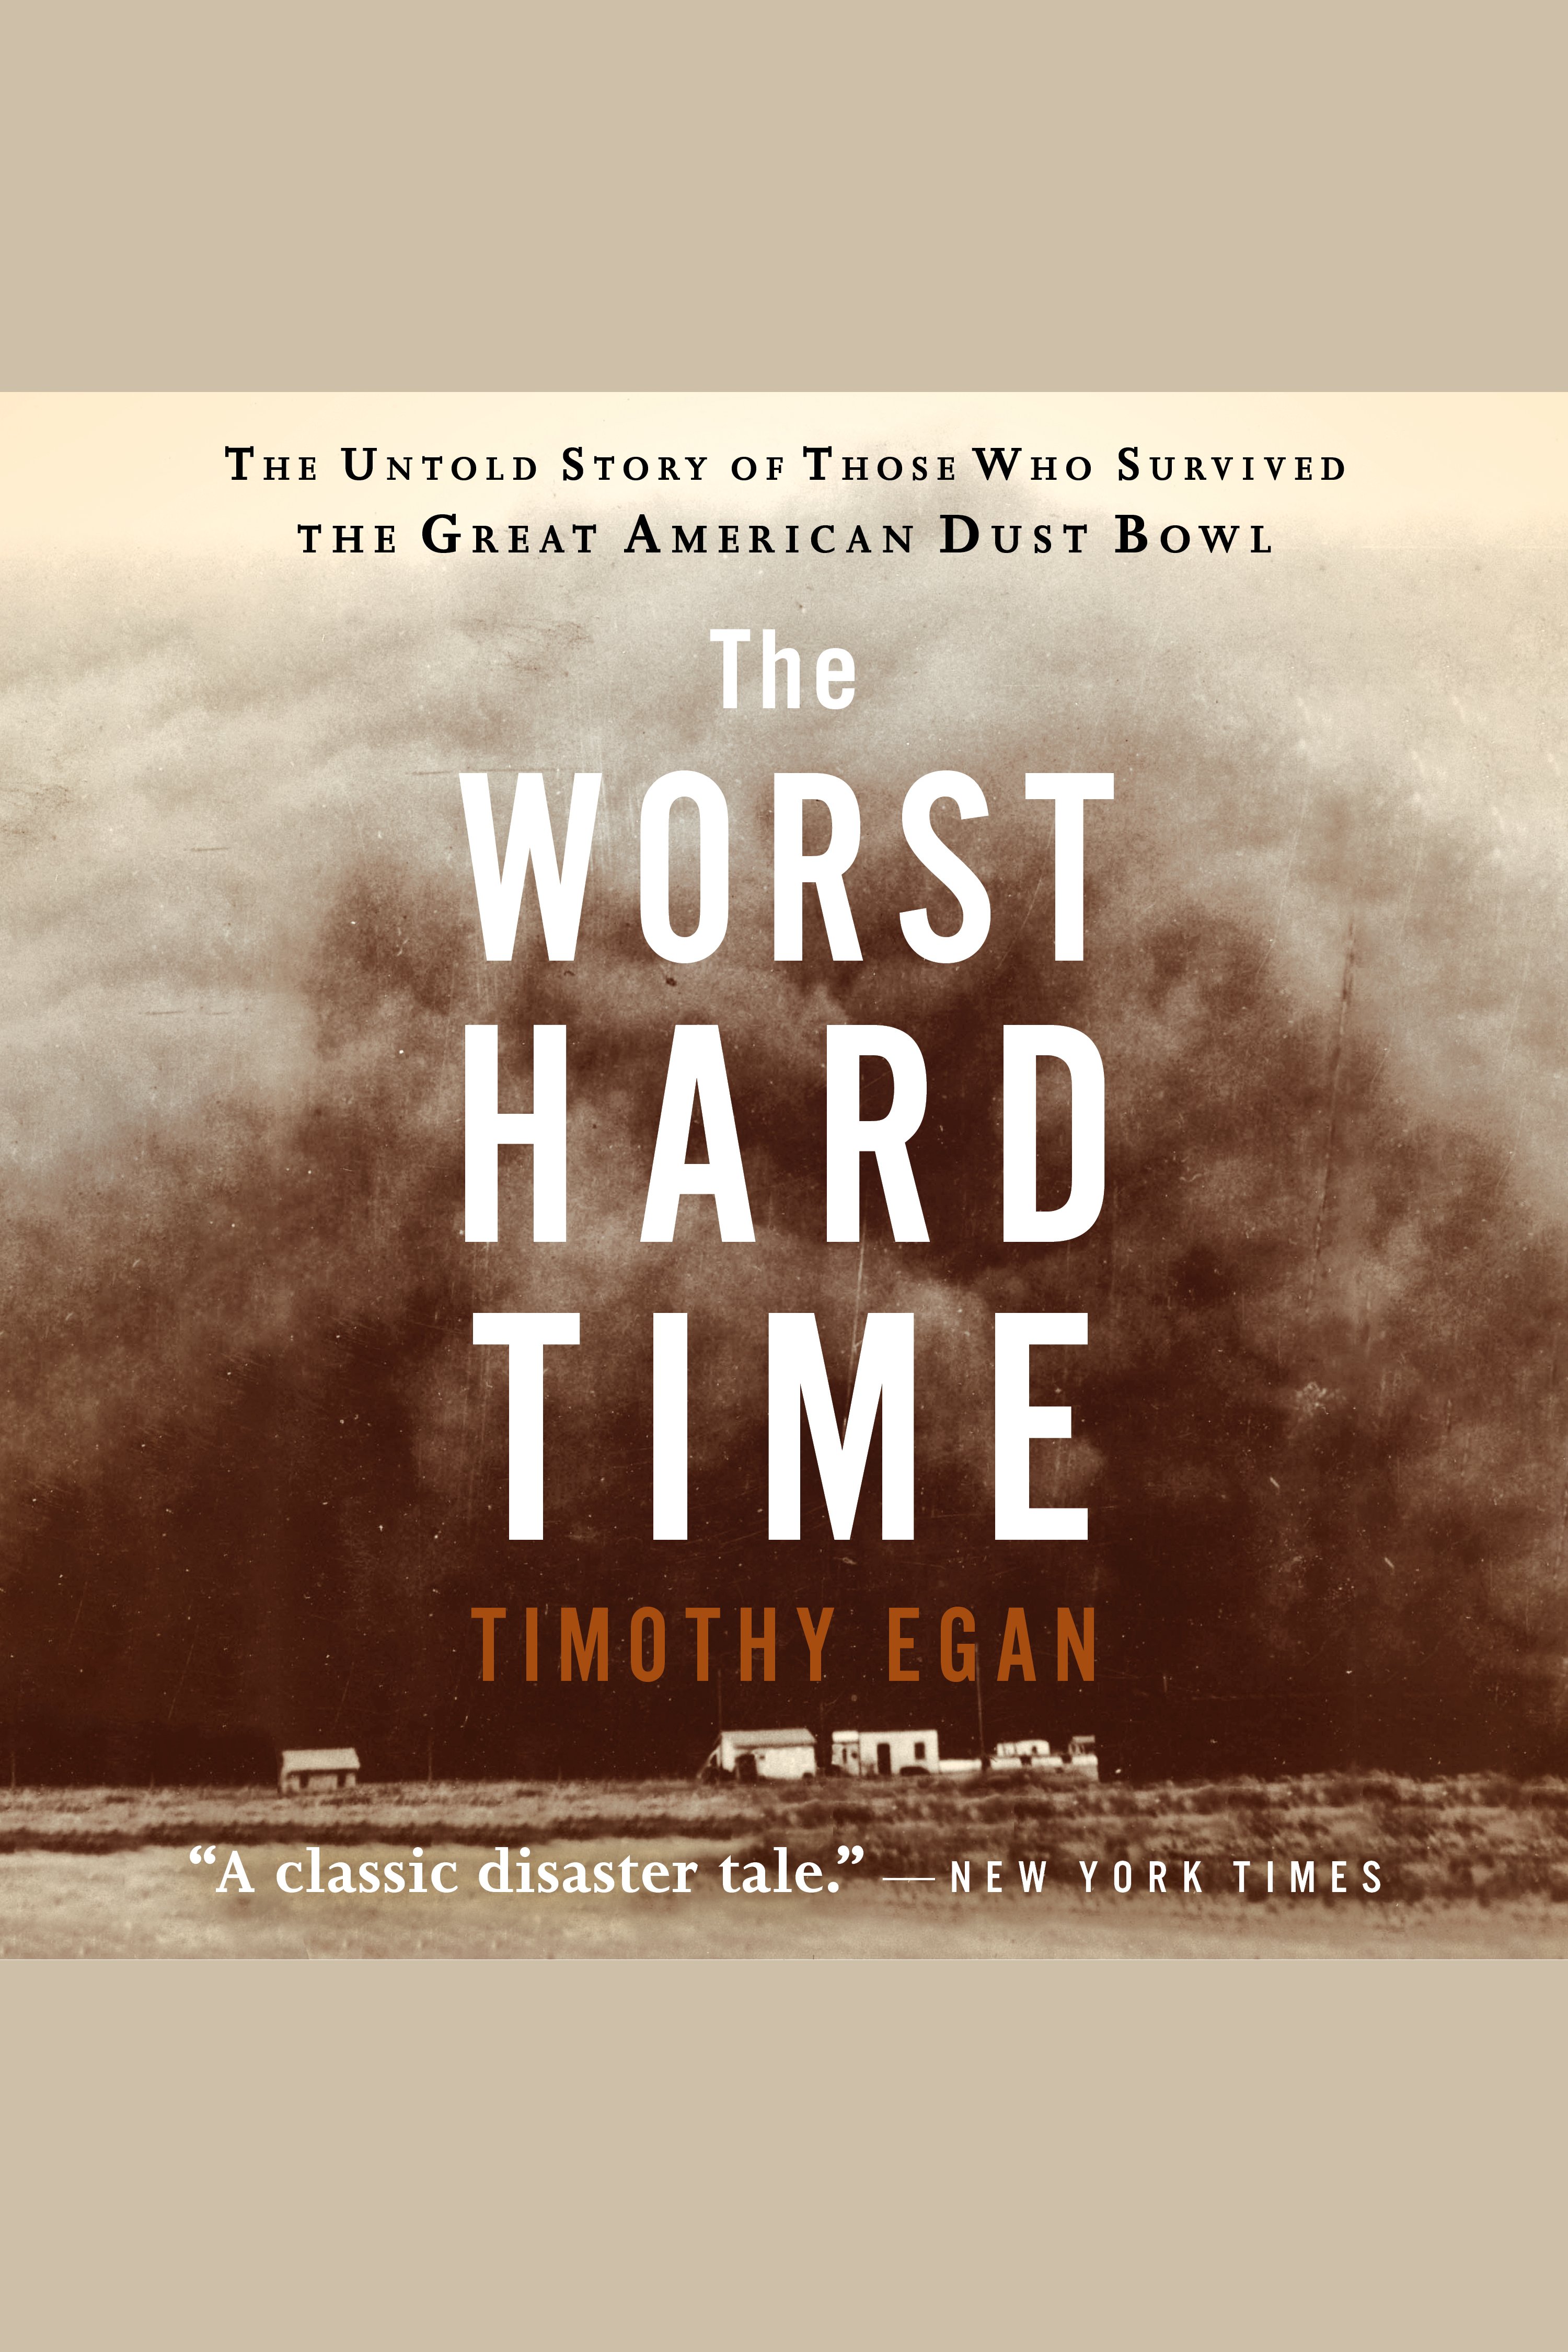 The Worst Hard Time The Untold Story of Those Who Survived the Great American Dust Bowl cover image